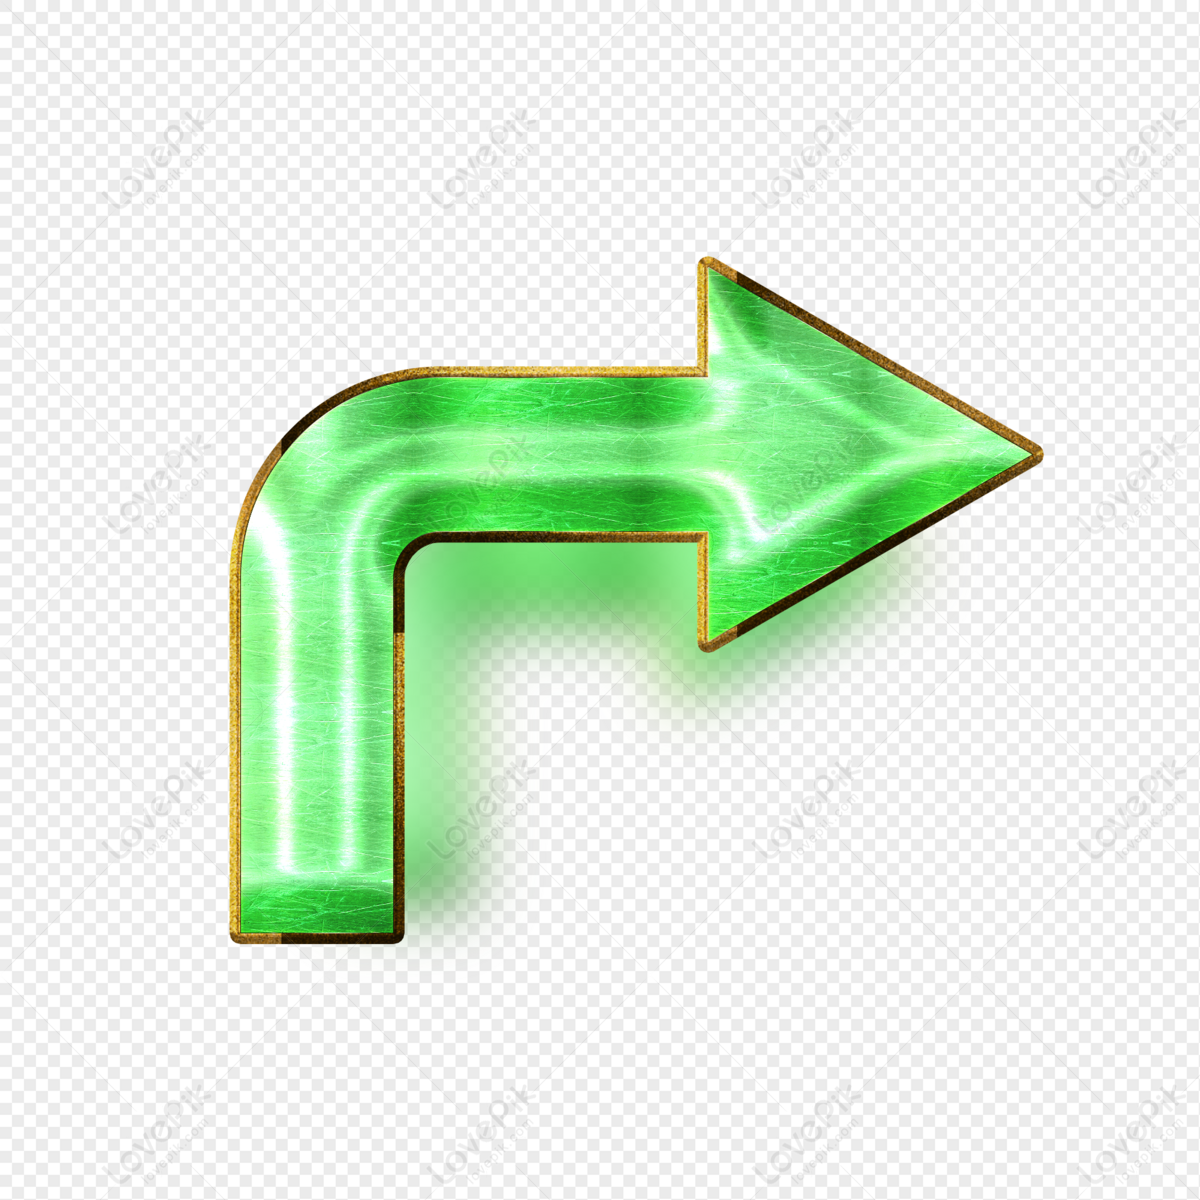 turn over arrow png